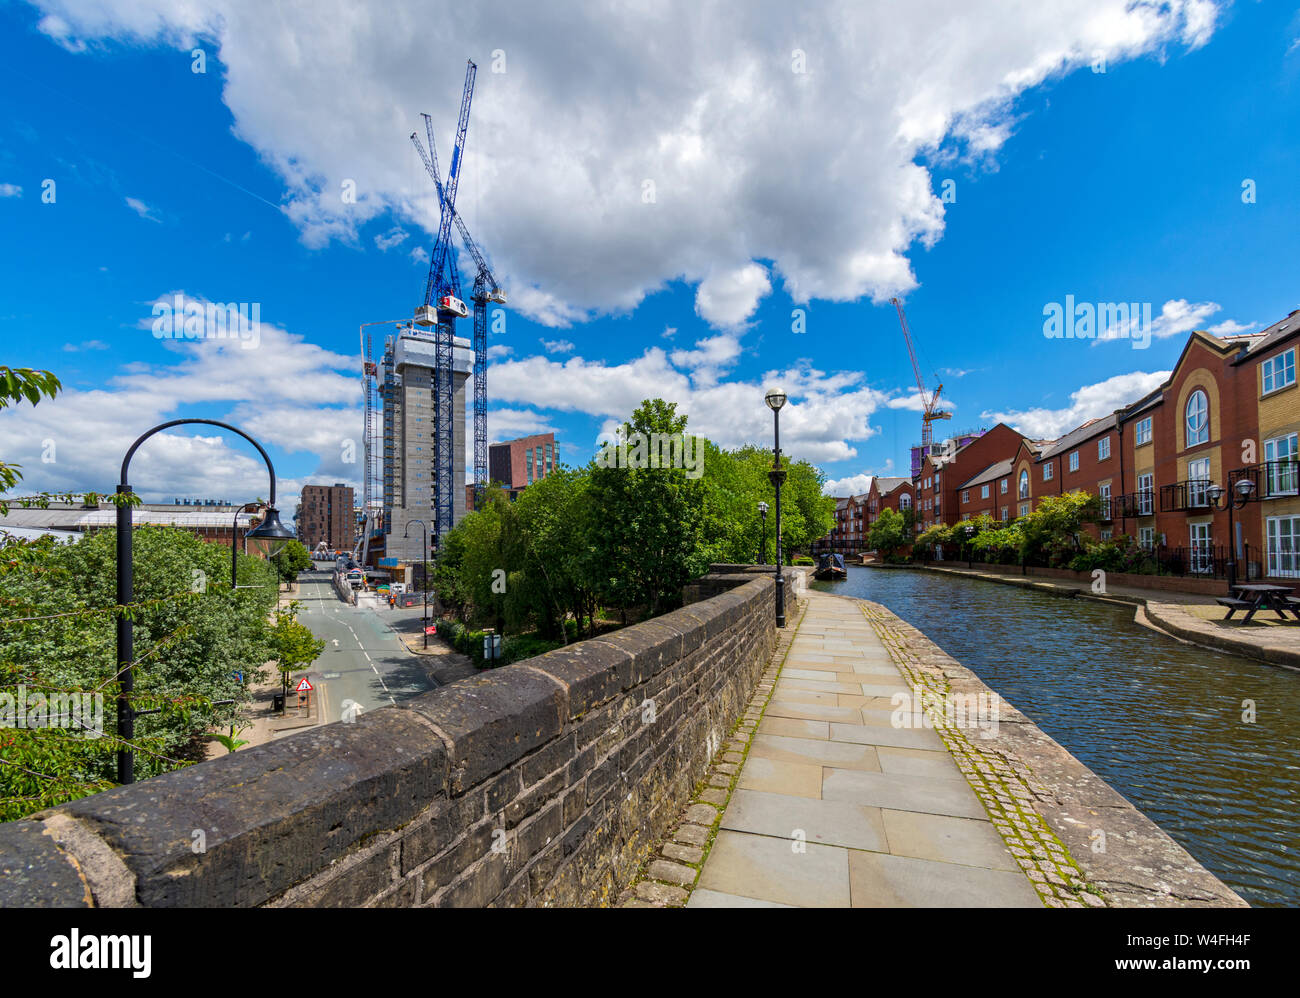 The Oxygen apartment block under construction, June 2019, from the Ashton Canal aqueduct over Store Street, Manchester, England, UK. Stock Photo